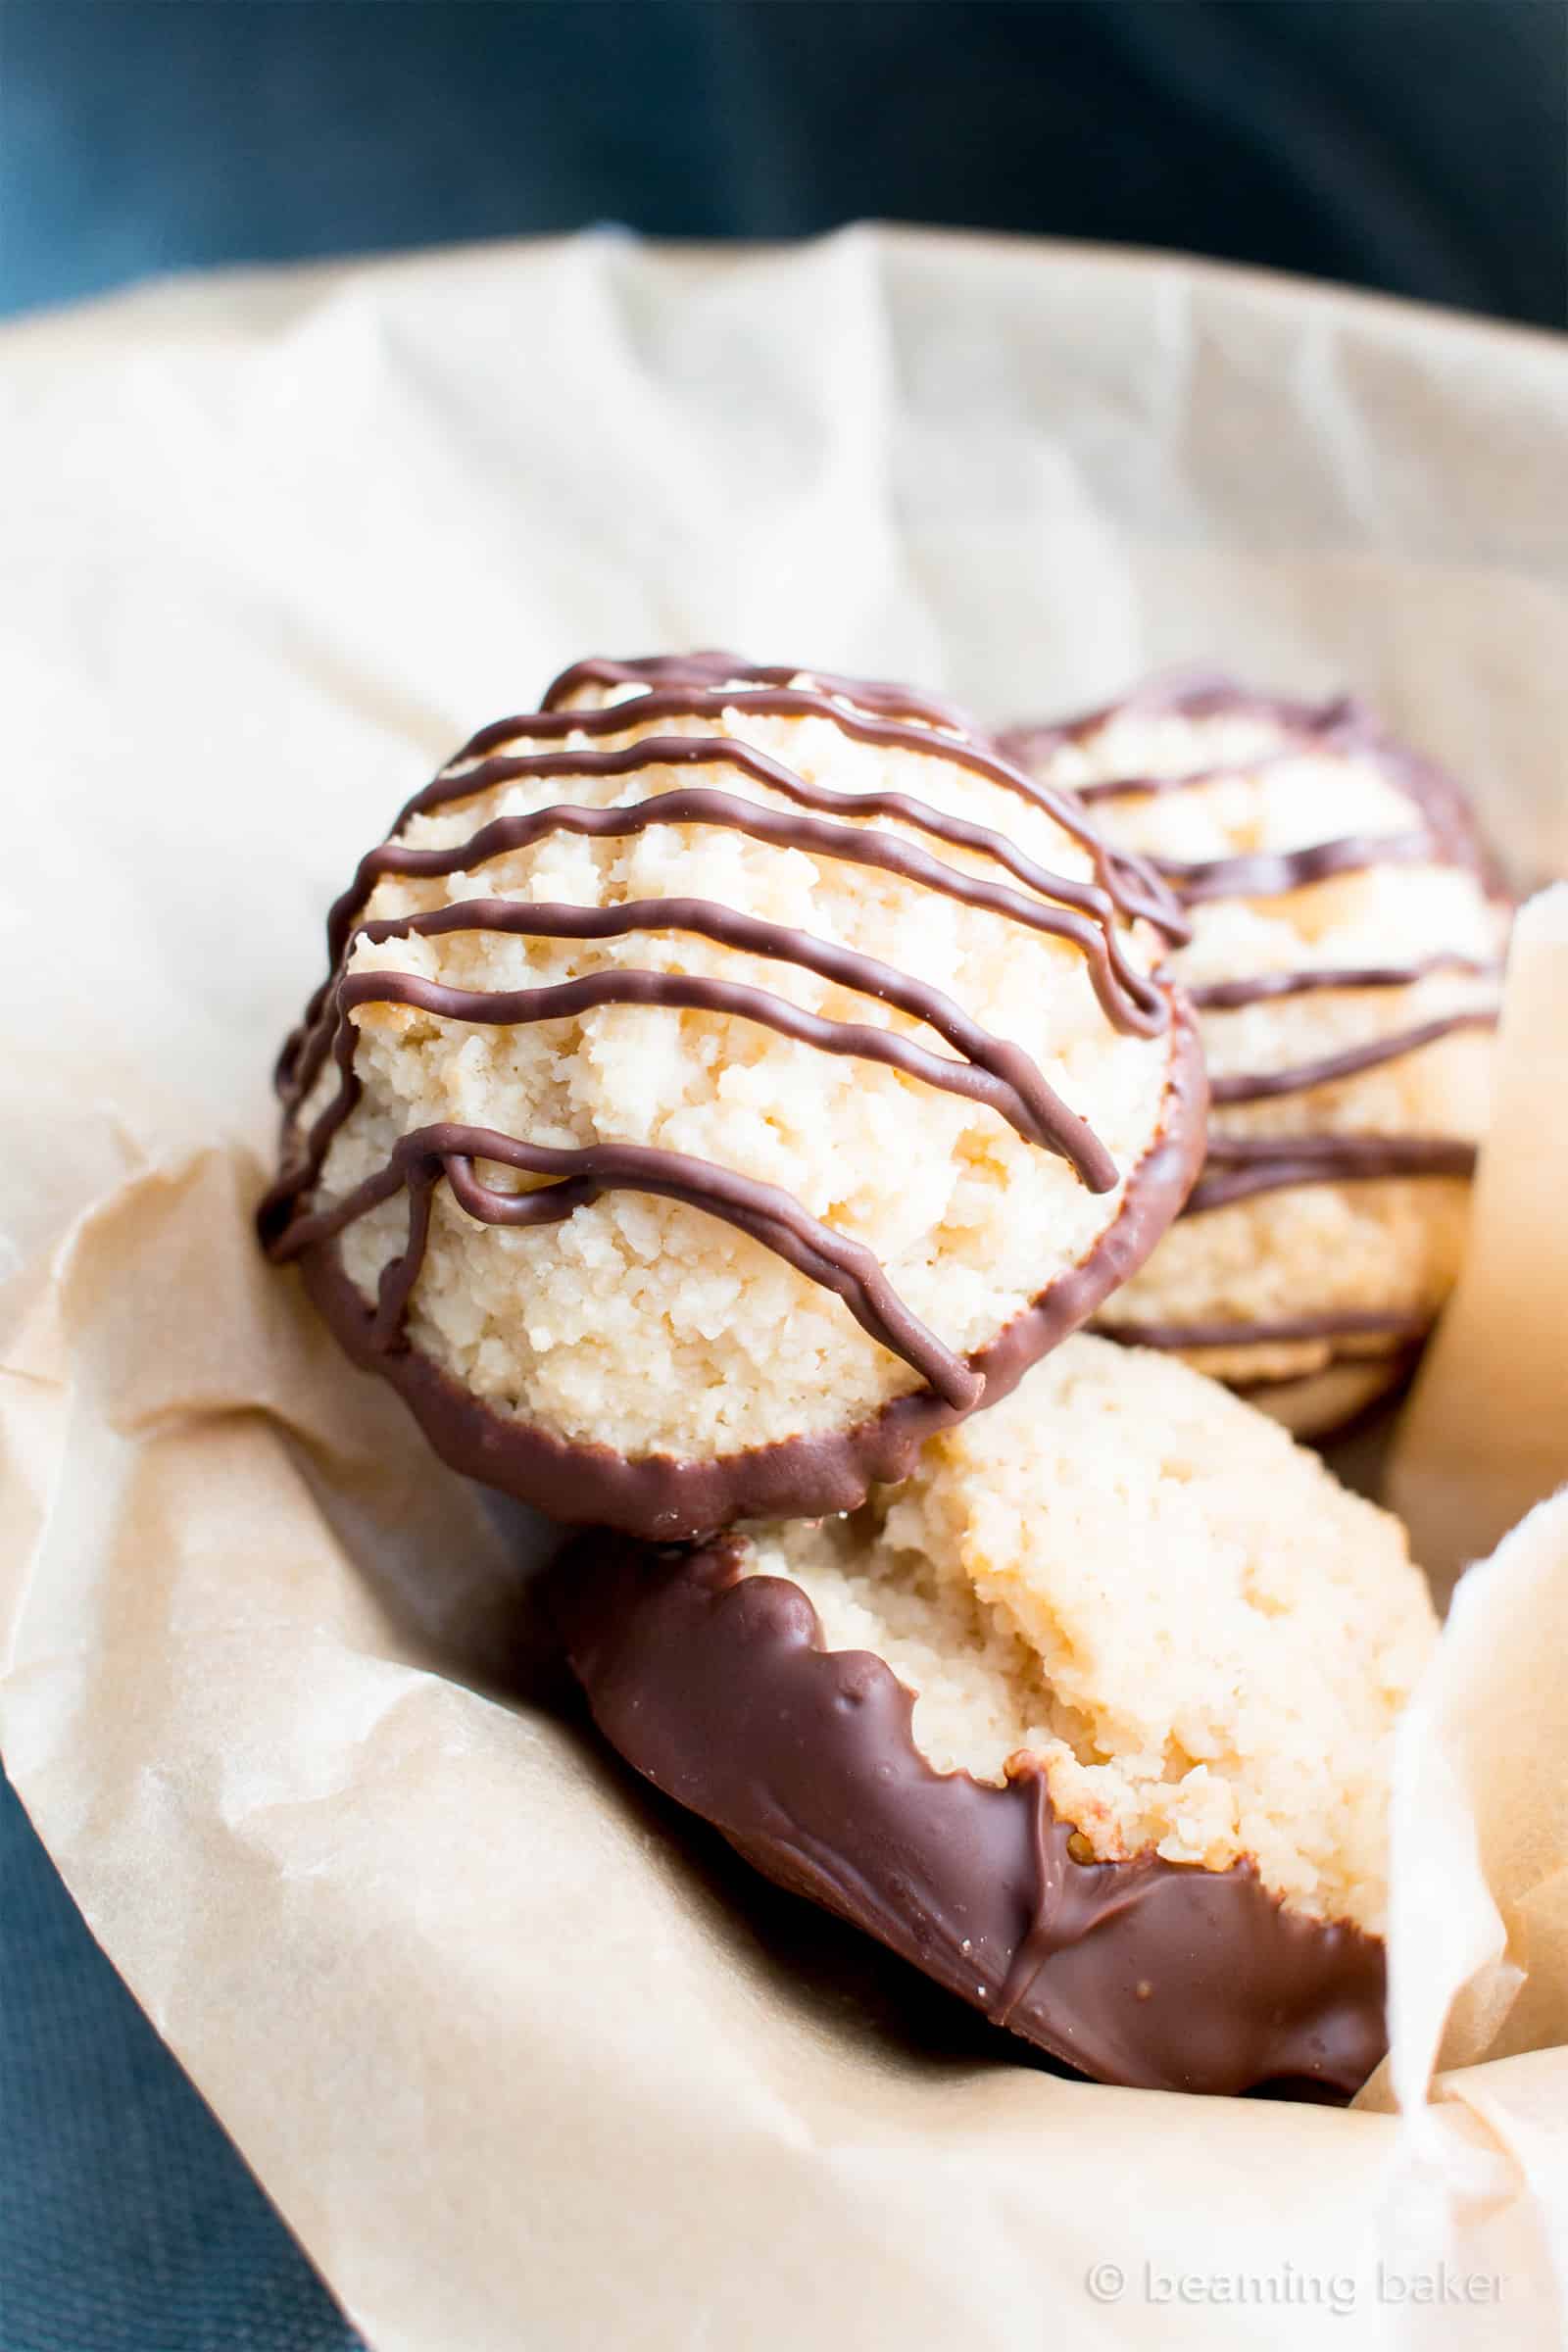 Chocolate Dipped Vegan Coconut Macaroons Recipe (V, GF): an easy recipe for chewy and satisfying chocolate-dipped coconut macaroons made with whole ingredients! #Vegan #Paleo #GlutenFree #DairyFree #Cookies #Coconut #Macaroons #Dessert | Recipe on BeamingBaker.com